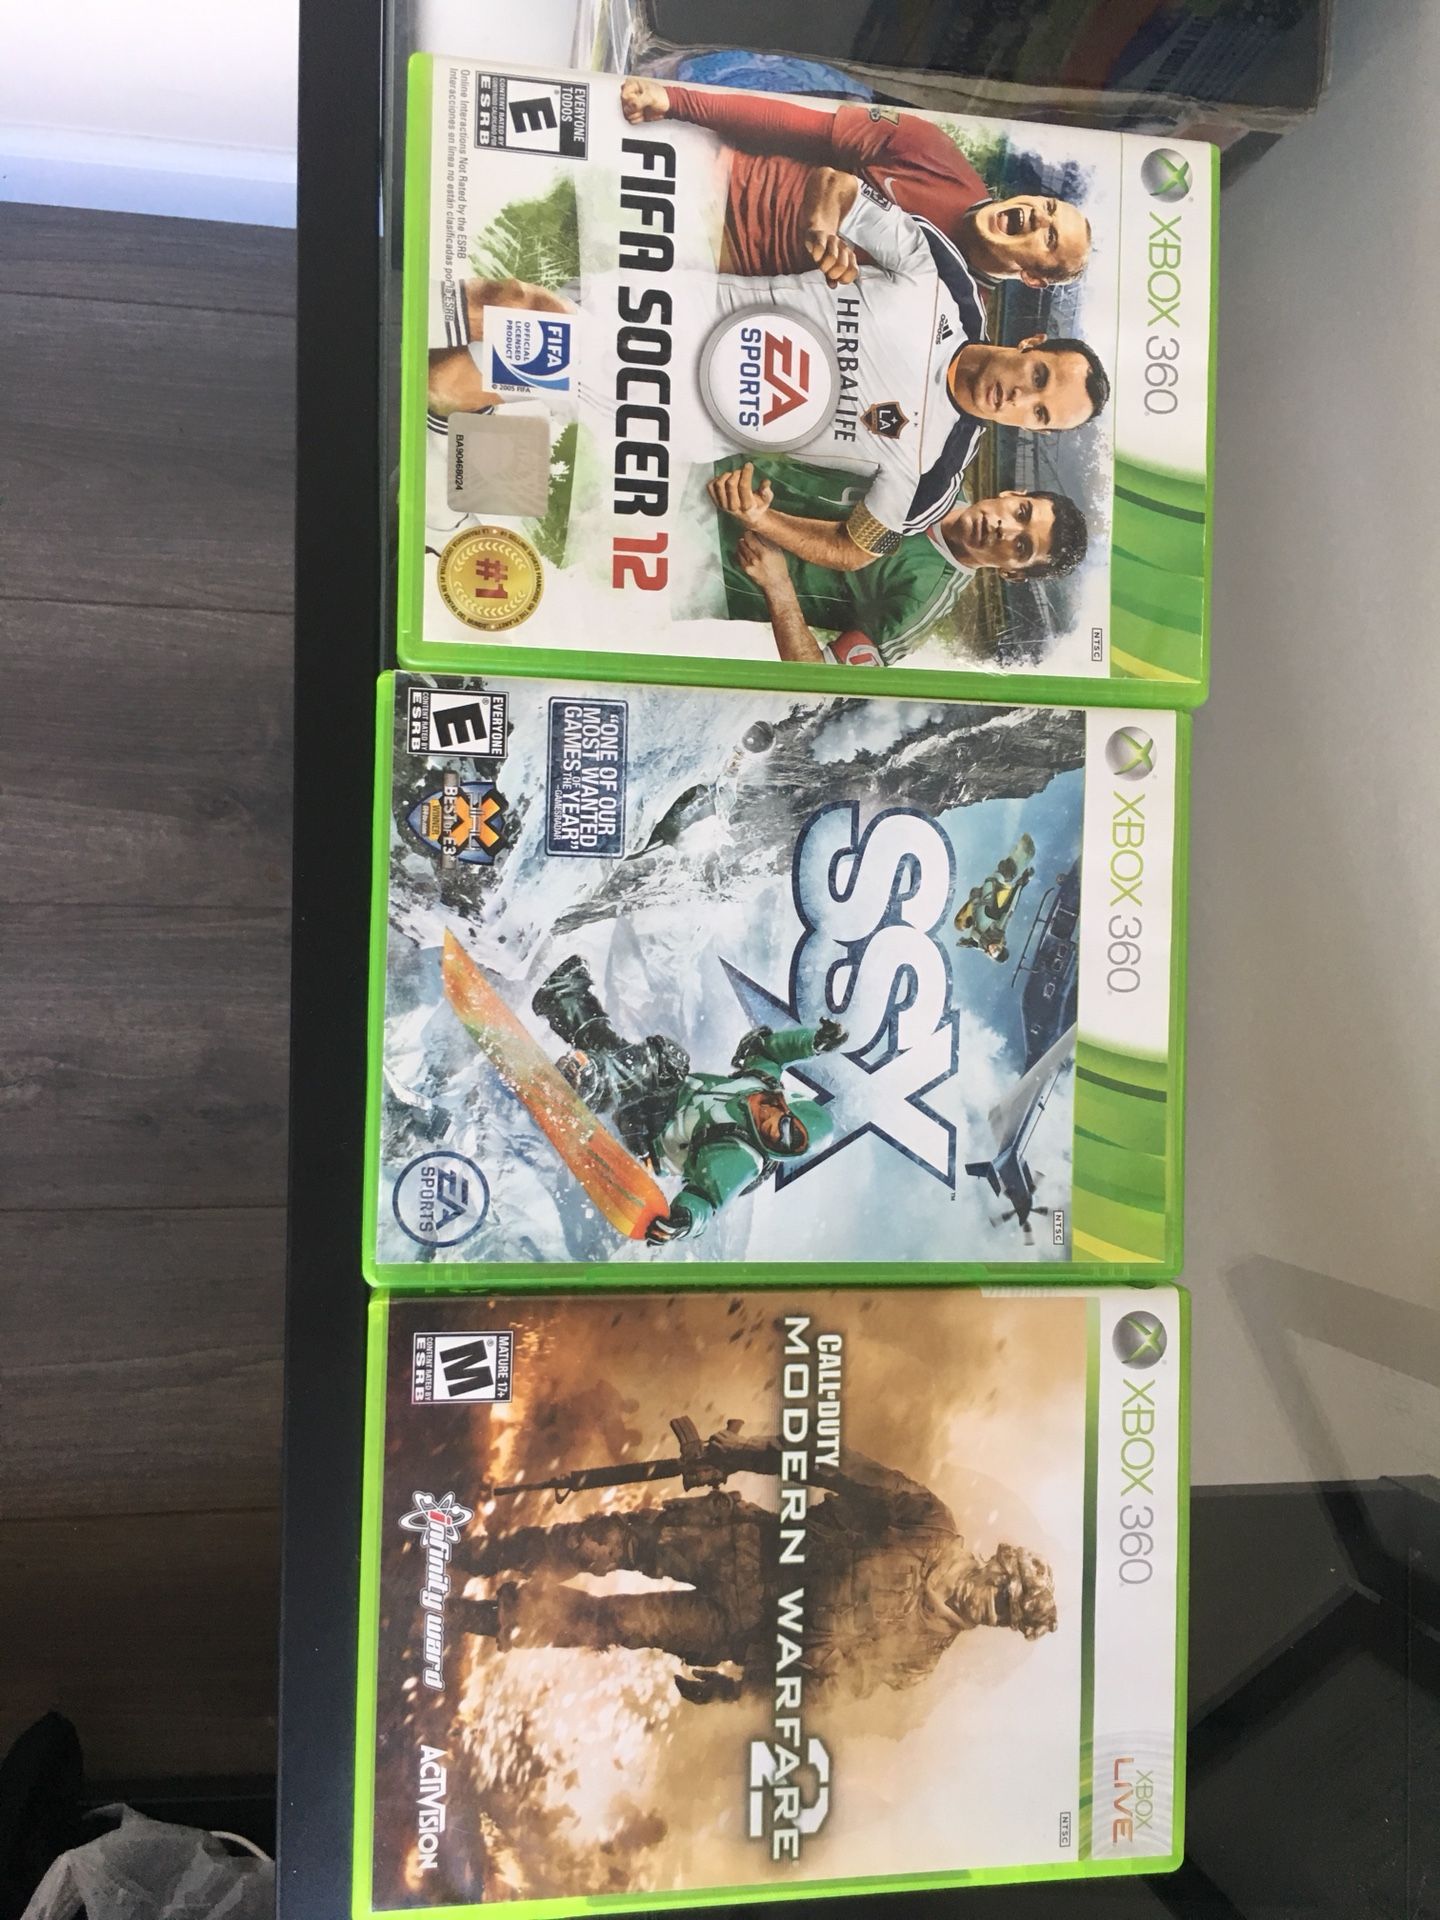 Xbox 360 games (modern warfare 2, SSX tricky, and fifa 12)